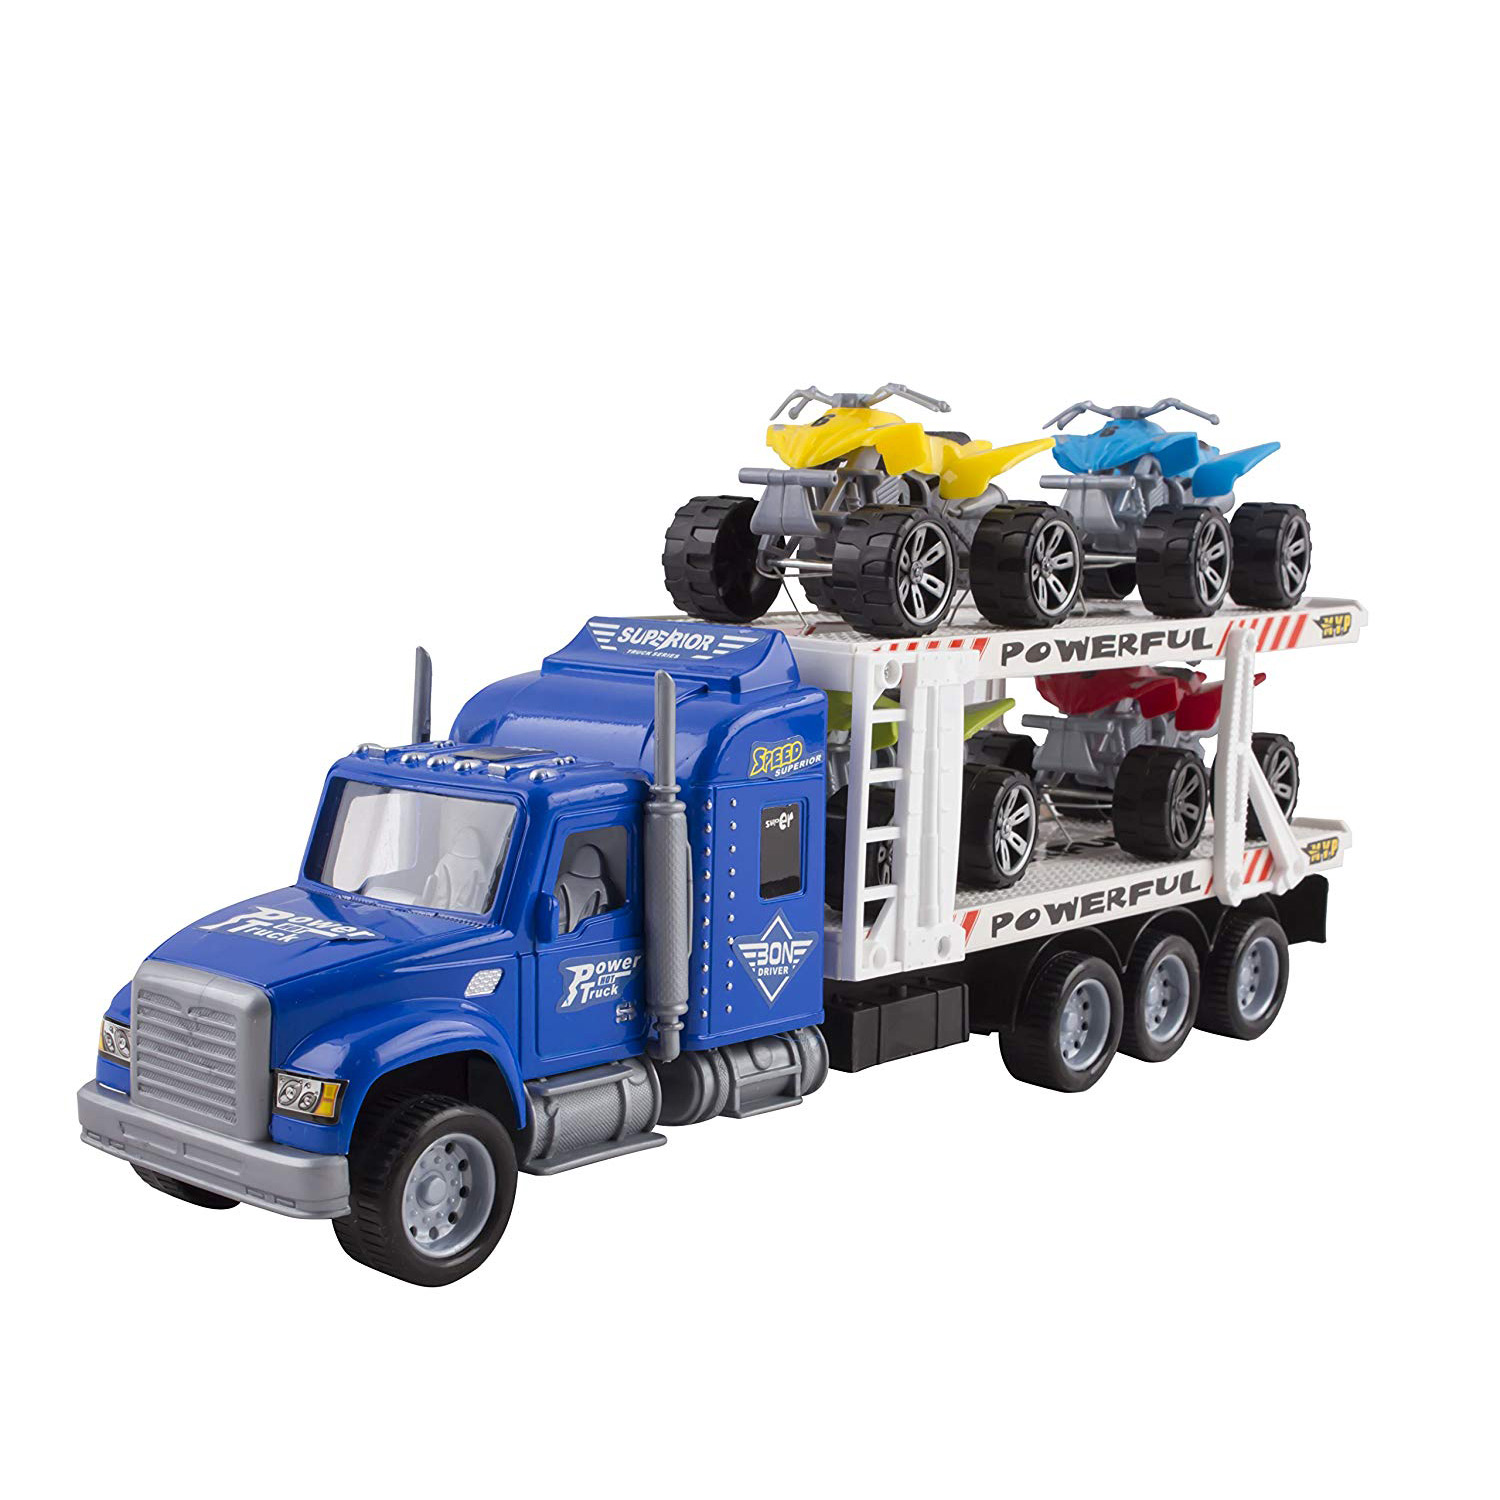 Toy Truck Transporter Trailer 145 Childrens Friction Big Rig With 4 ATV Toys No Batteries Or Assembly Required Perfect Semi Truck For Kids Blue Truck